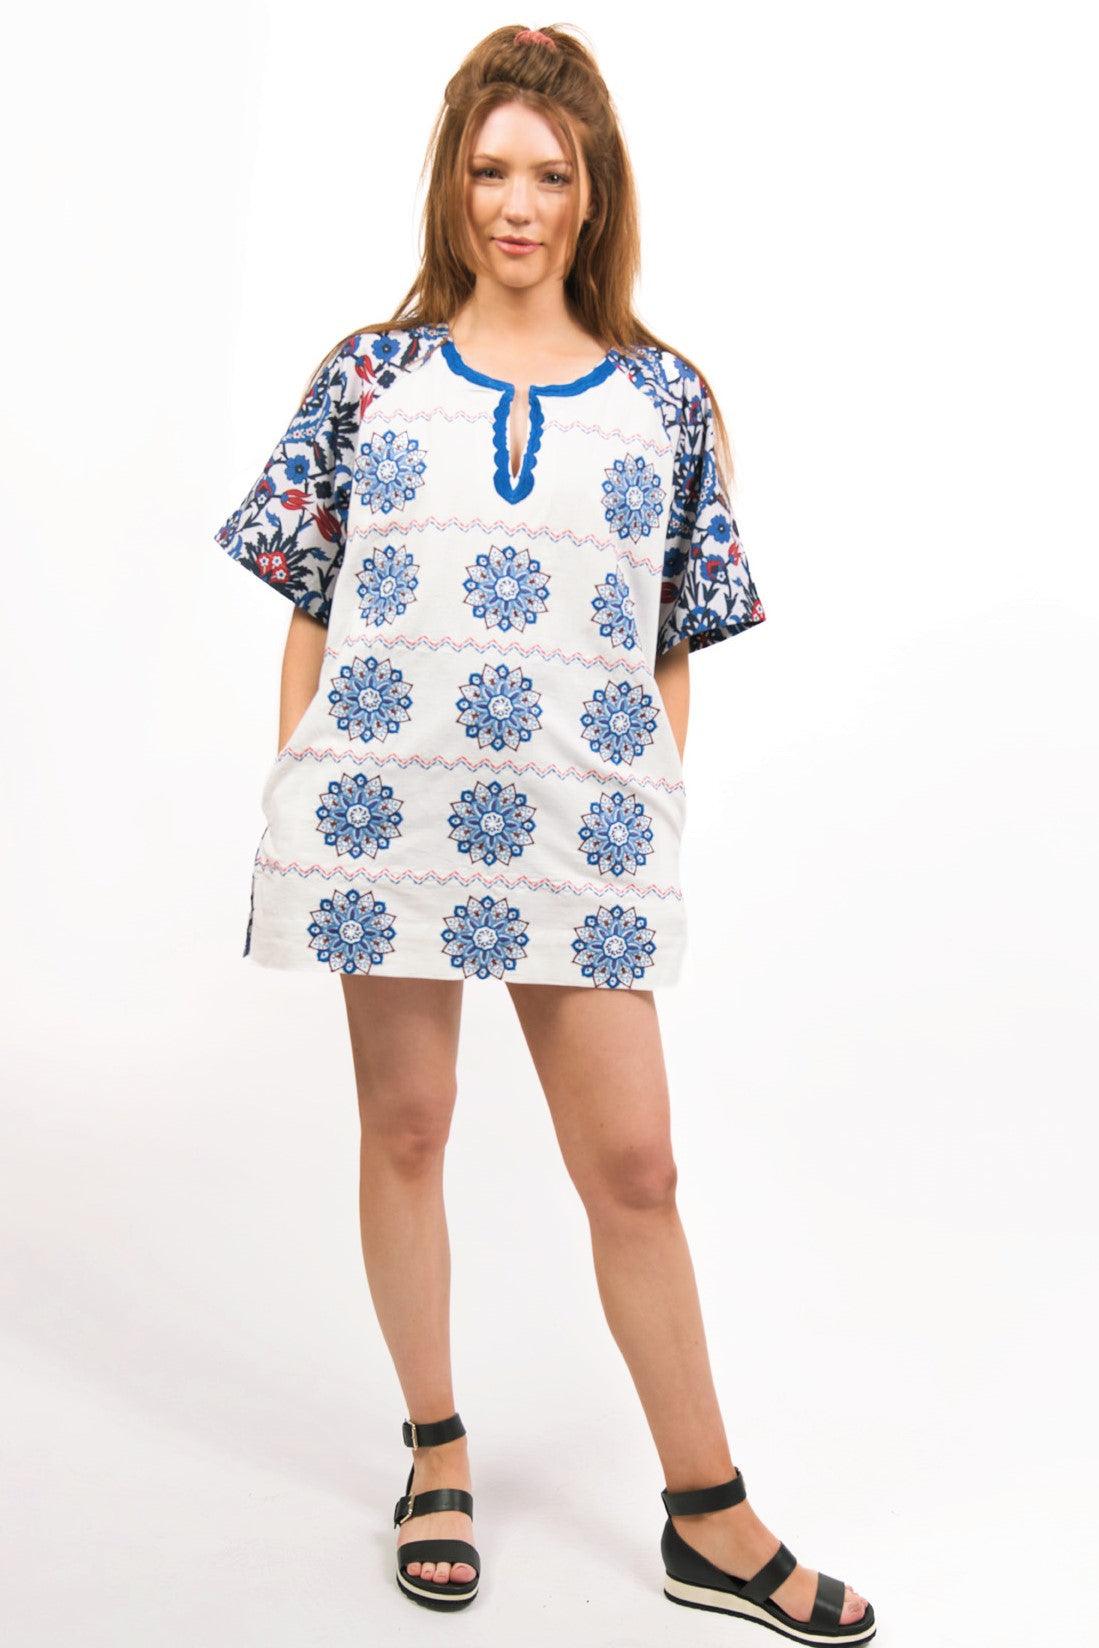 CELESTE EMBROIDERED TUNIC WITH MANDALA EMBROIDERY ON FRONT AND EMBROIDERY ON NECKLINE PLUS POCKETS - zohaonline